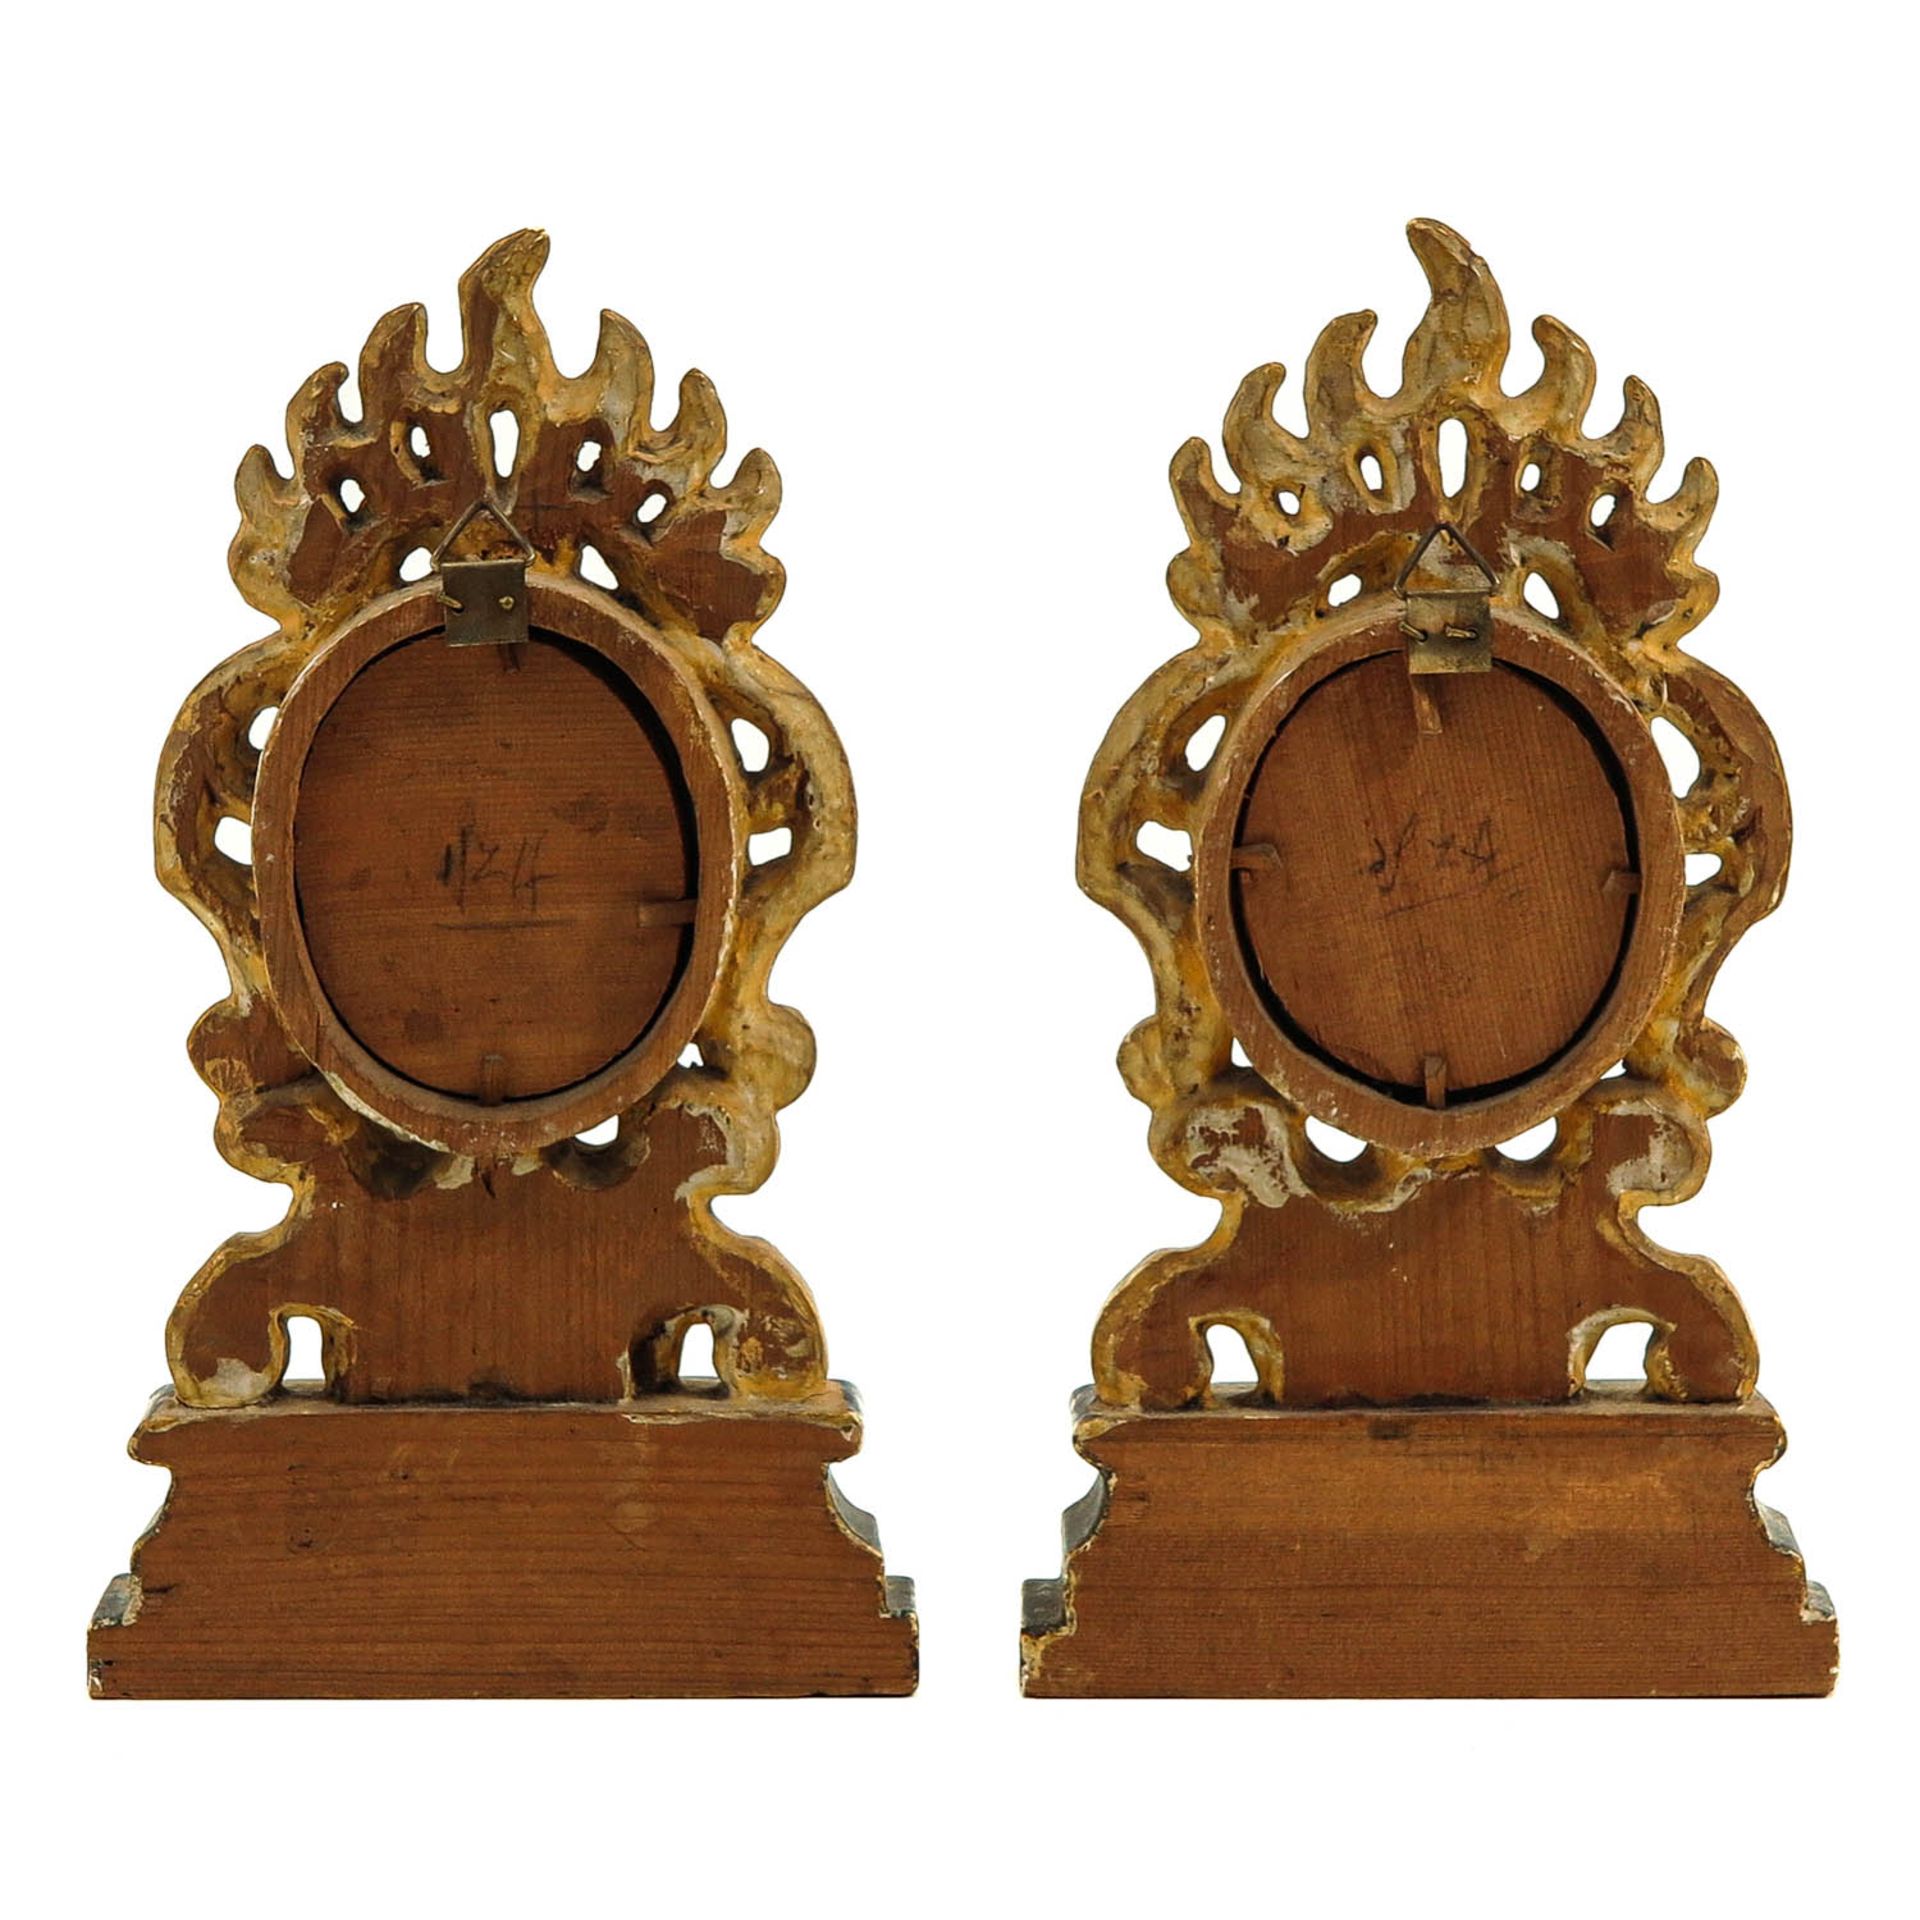 A Pair of Relic Holders Each Holding 5 Relics - Image 3 of 7